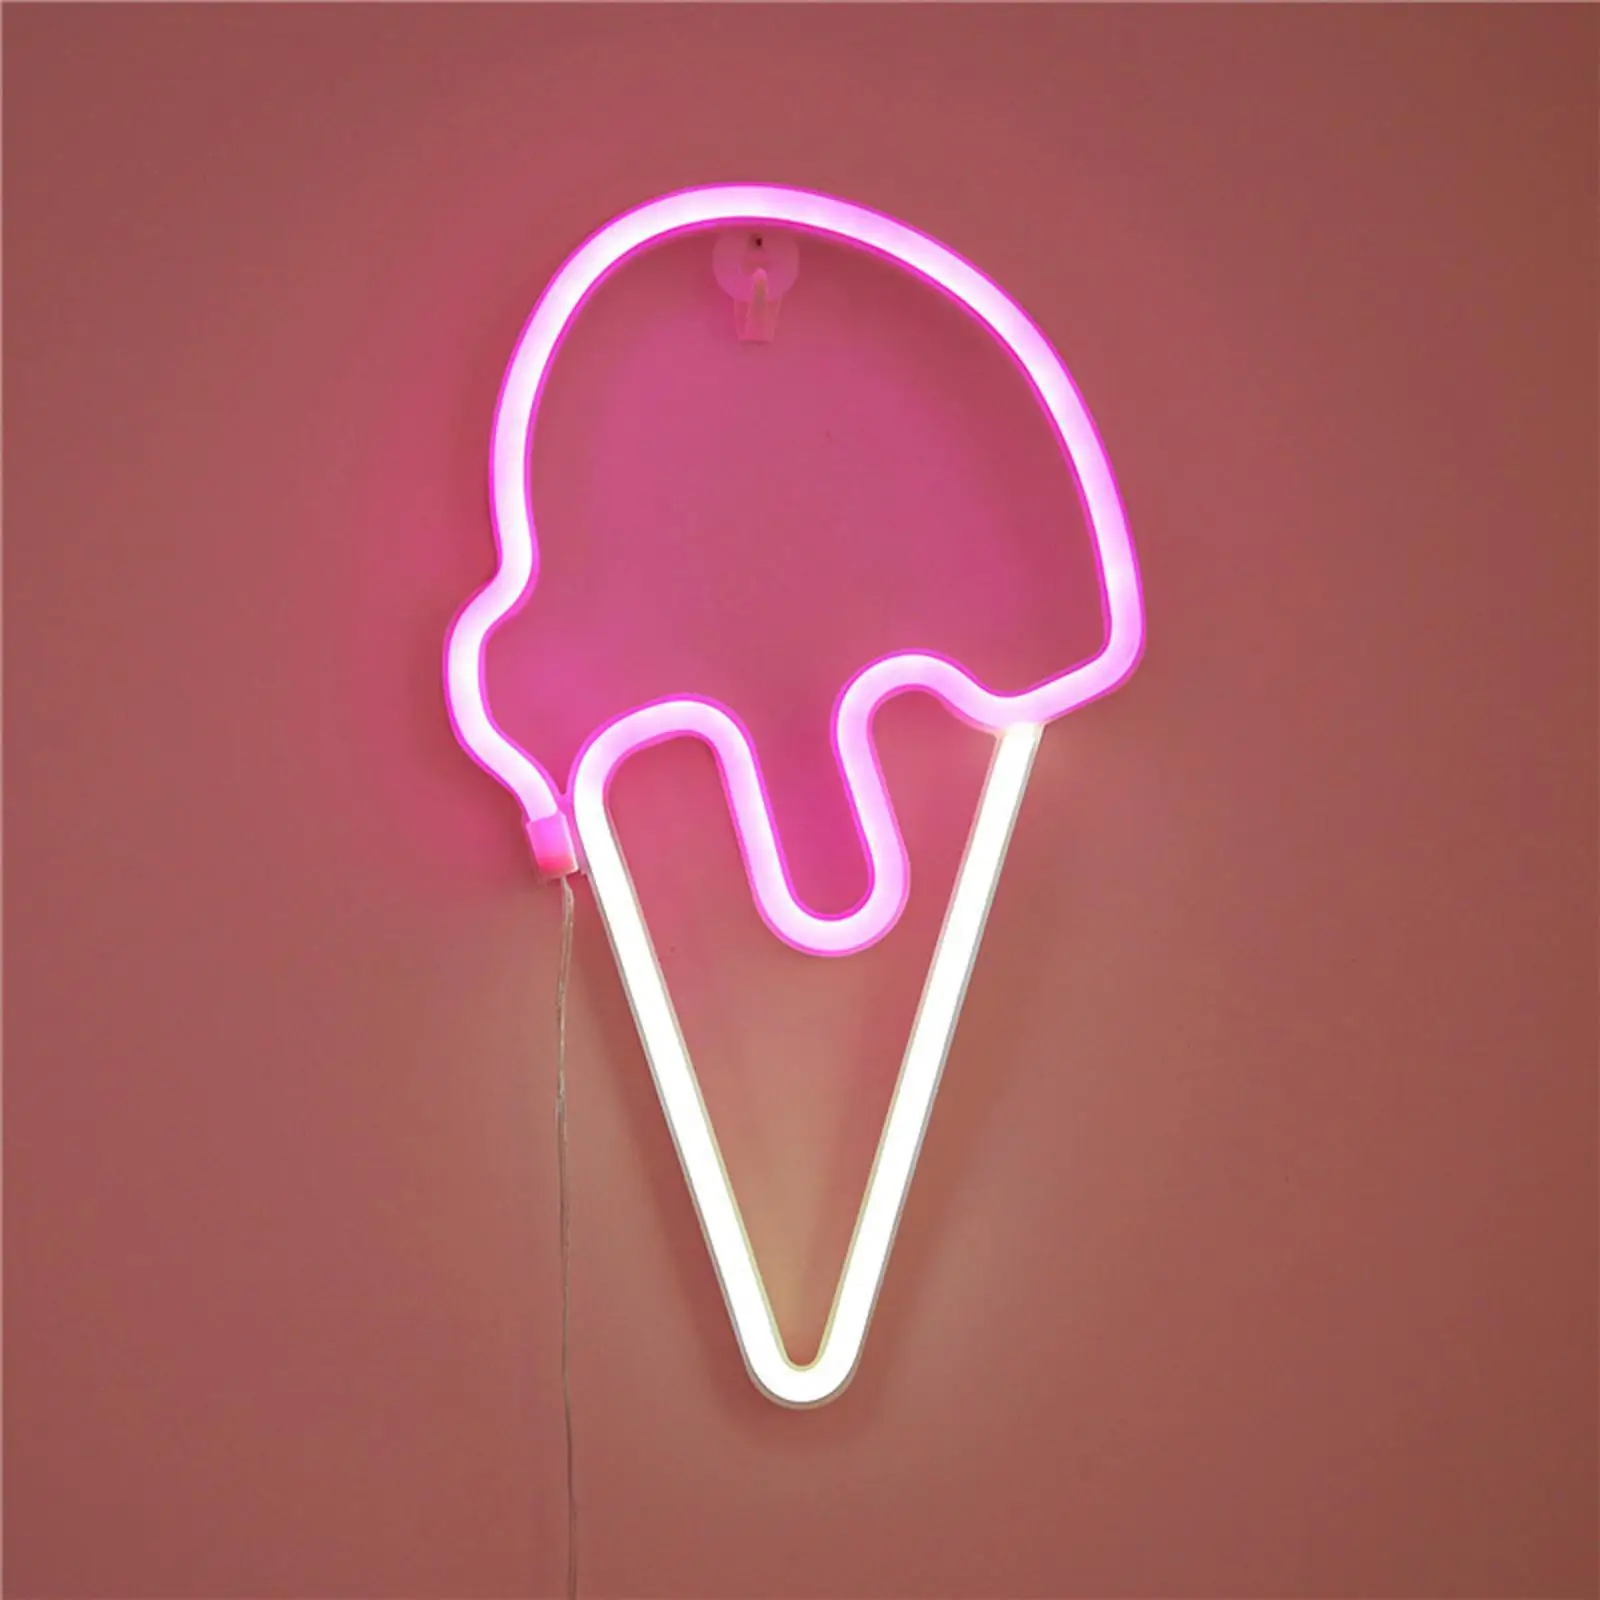 Ice Cream Neon Lightweight Birthday Gift Light up Signs Neon Sign LED Light for Bedside Living Room Party Festival